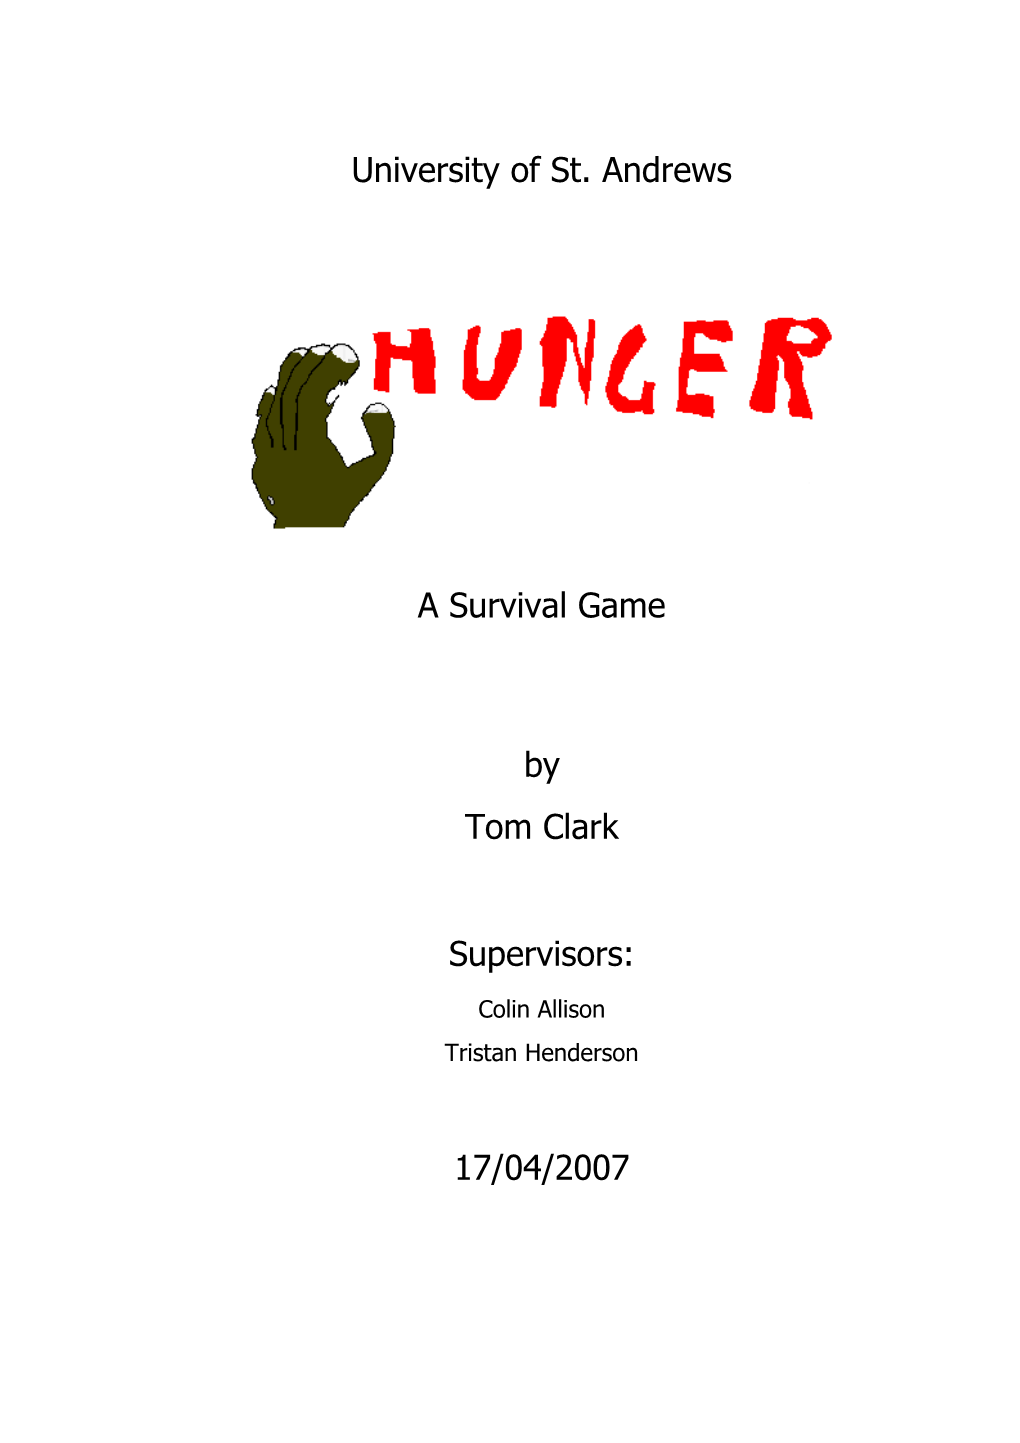 Tom Clark Hunger: a Survival Game CS4099 Software Project